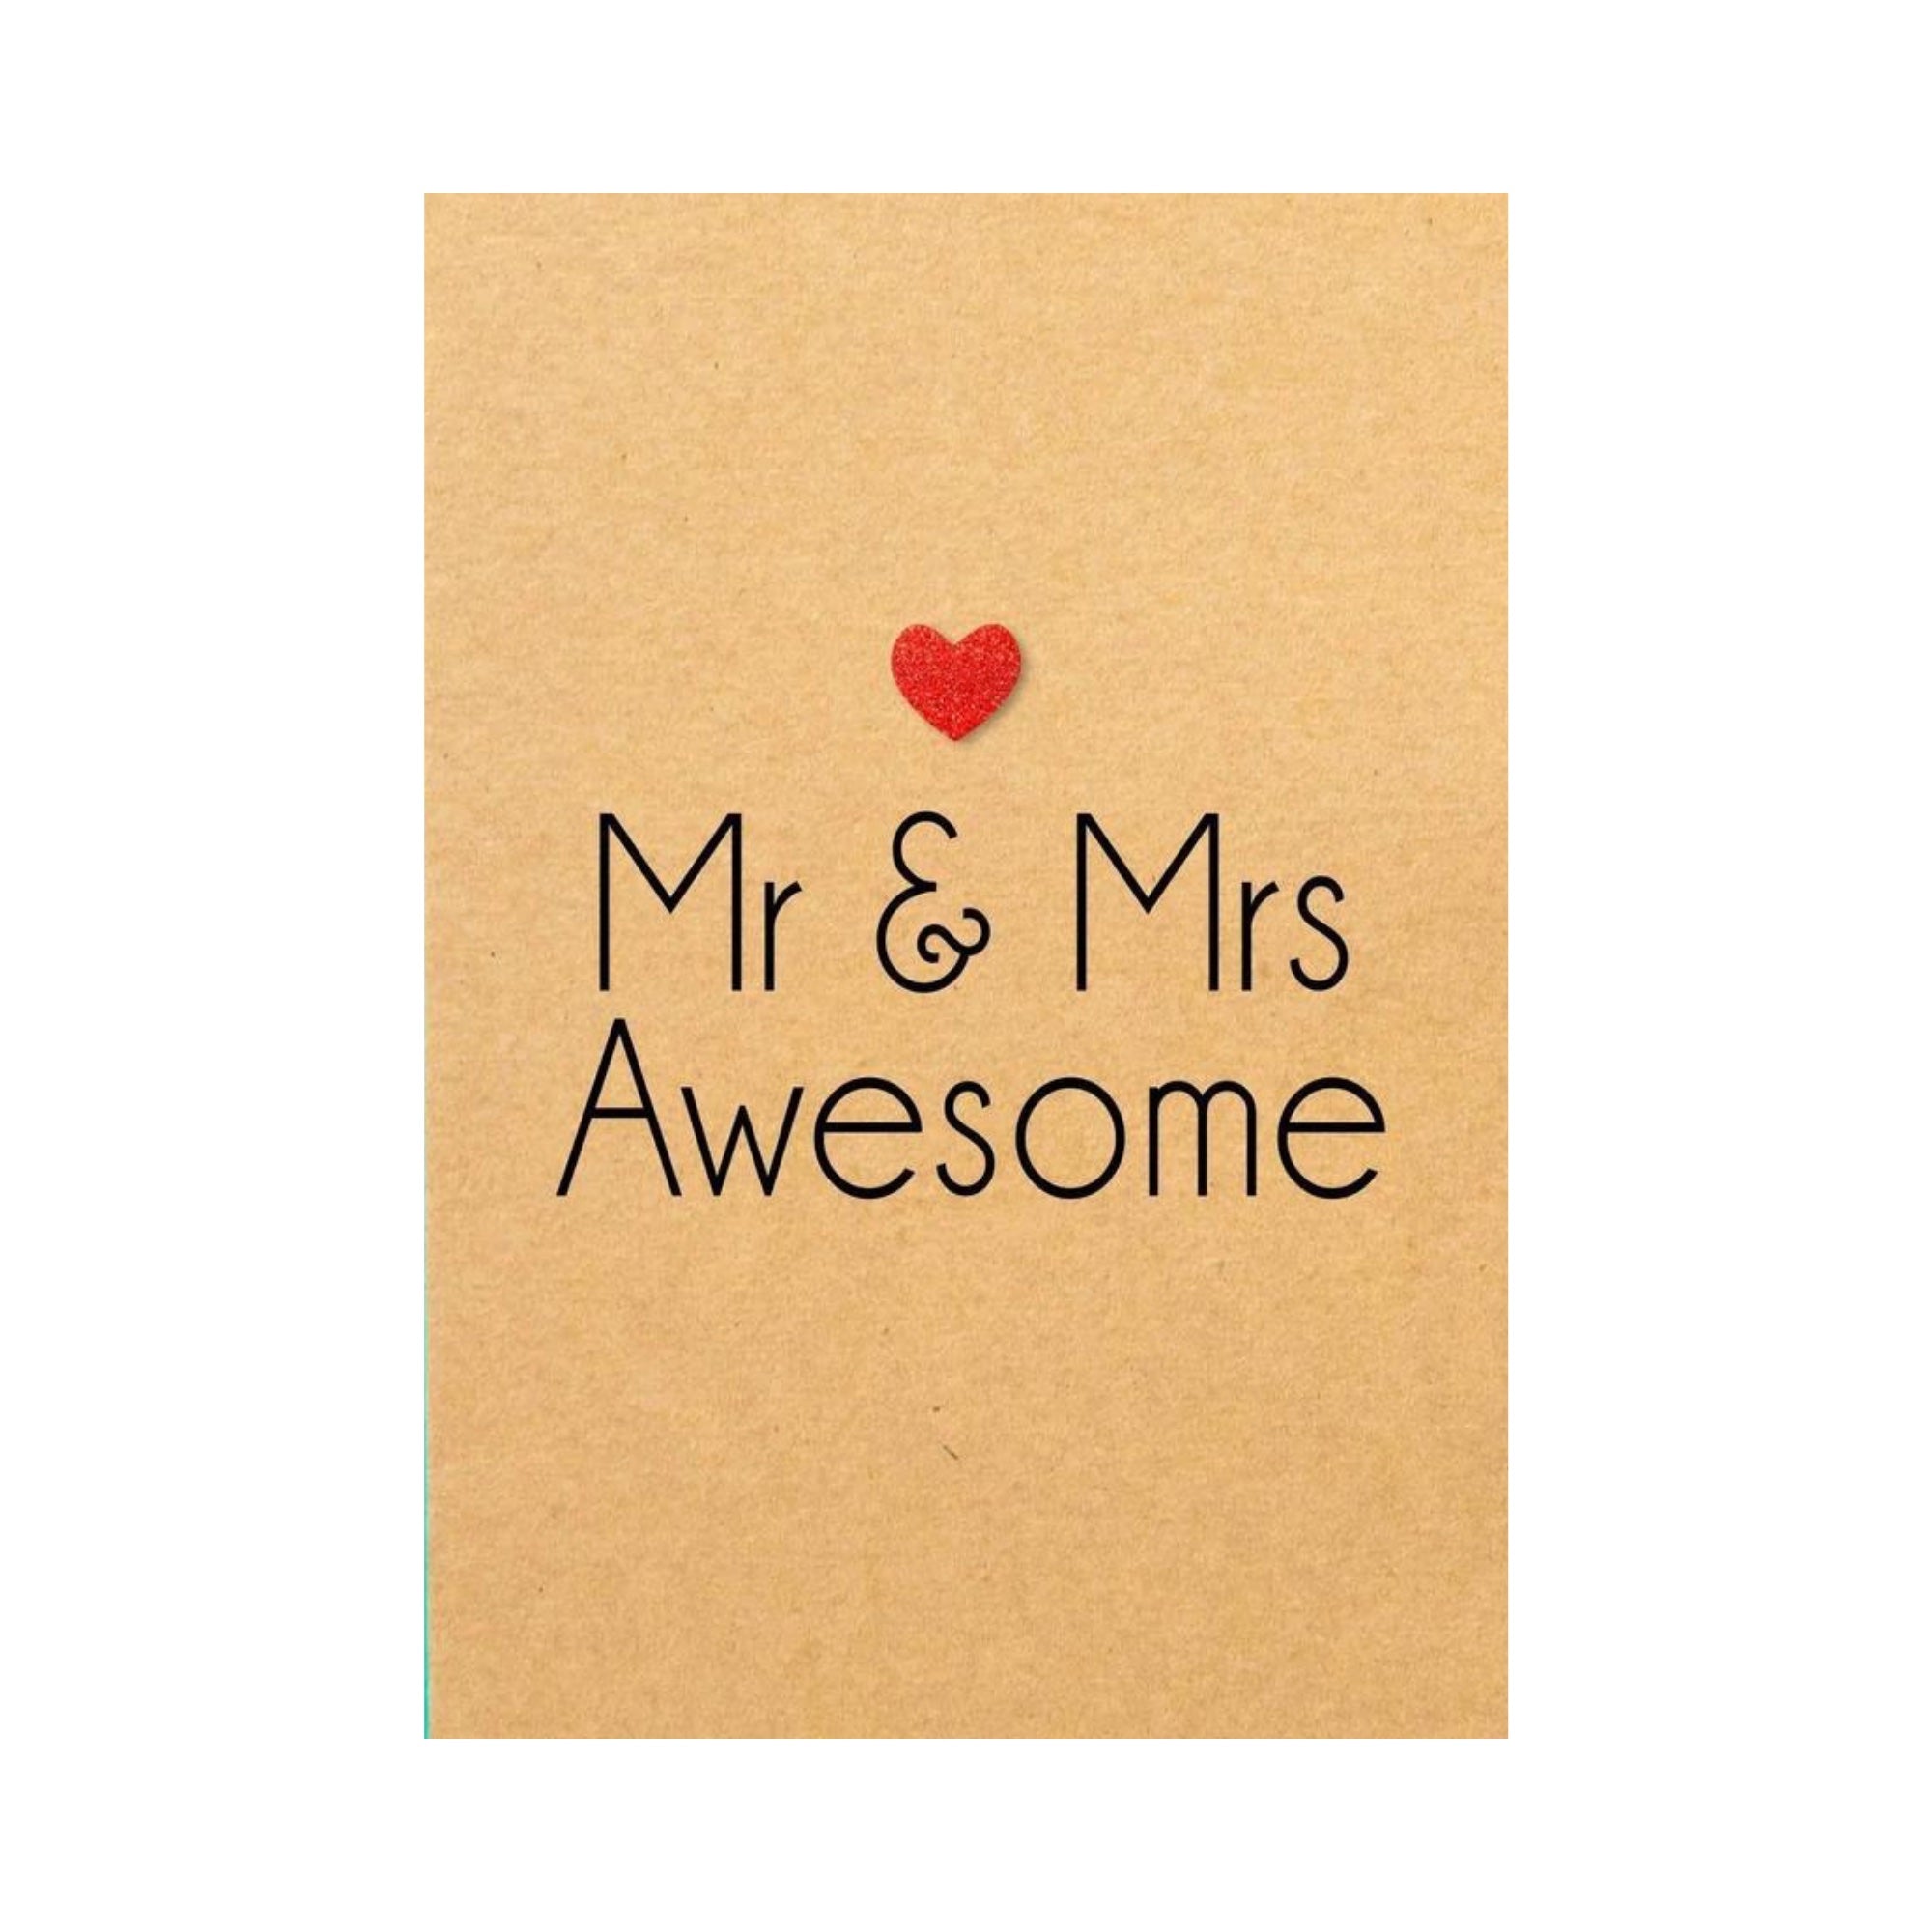 Mr & Mrs Awesome Card